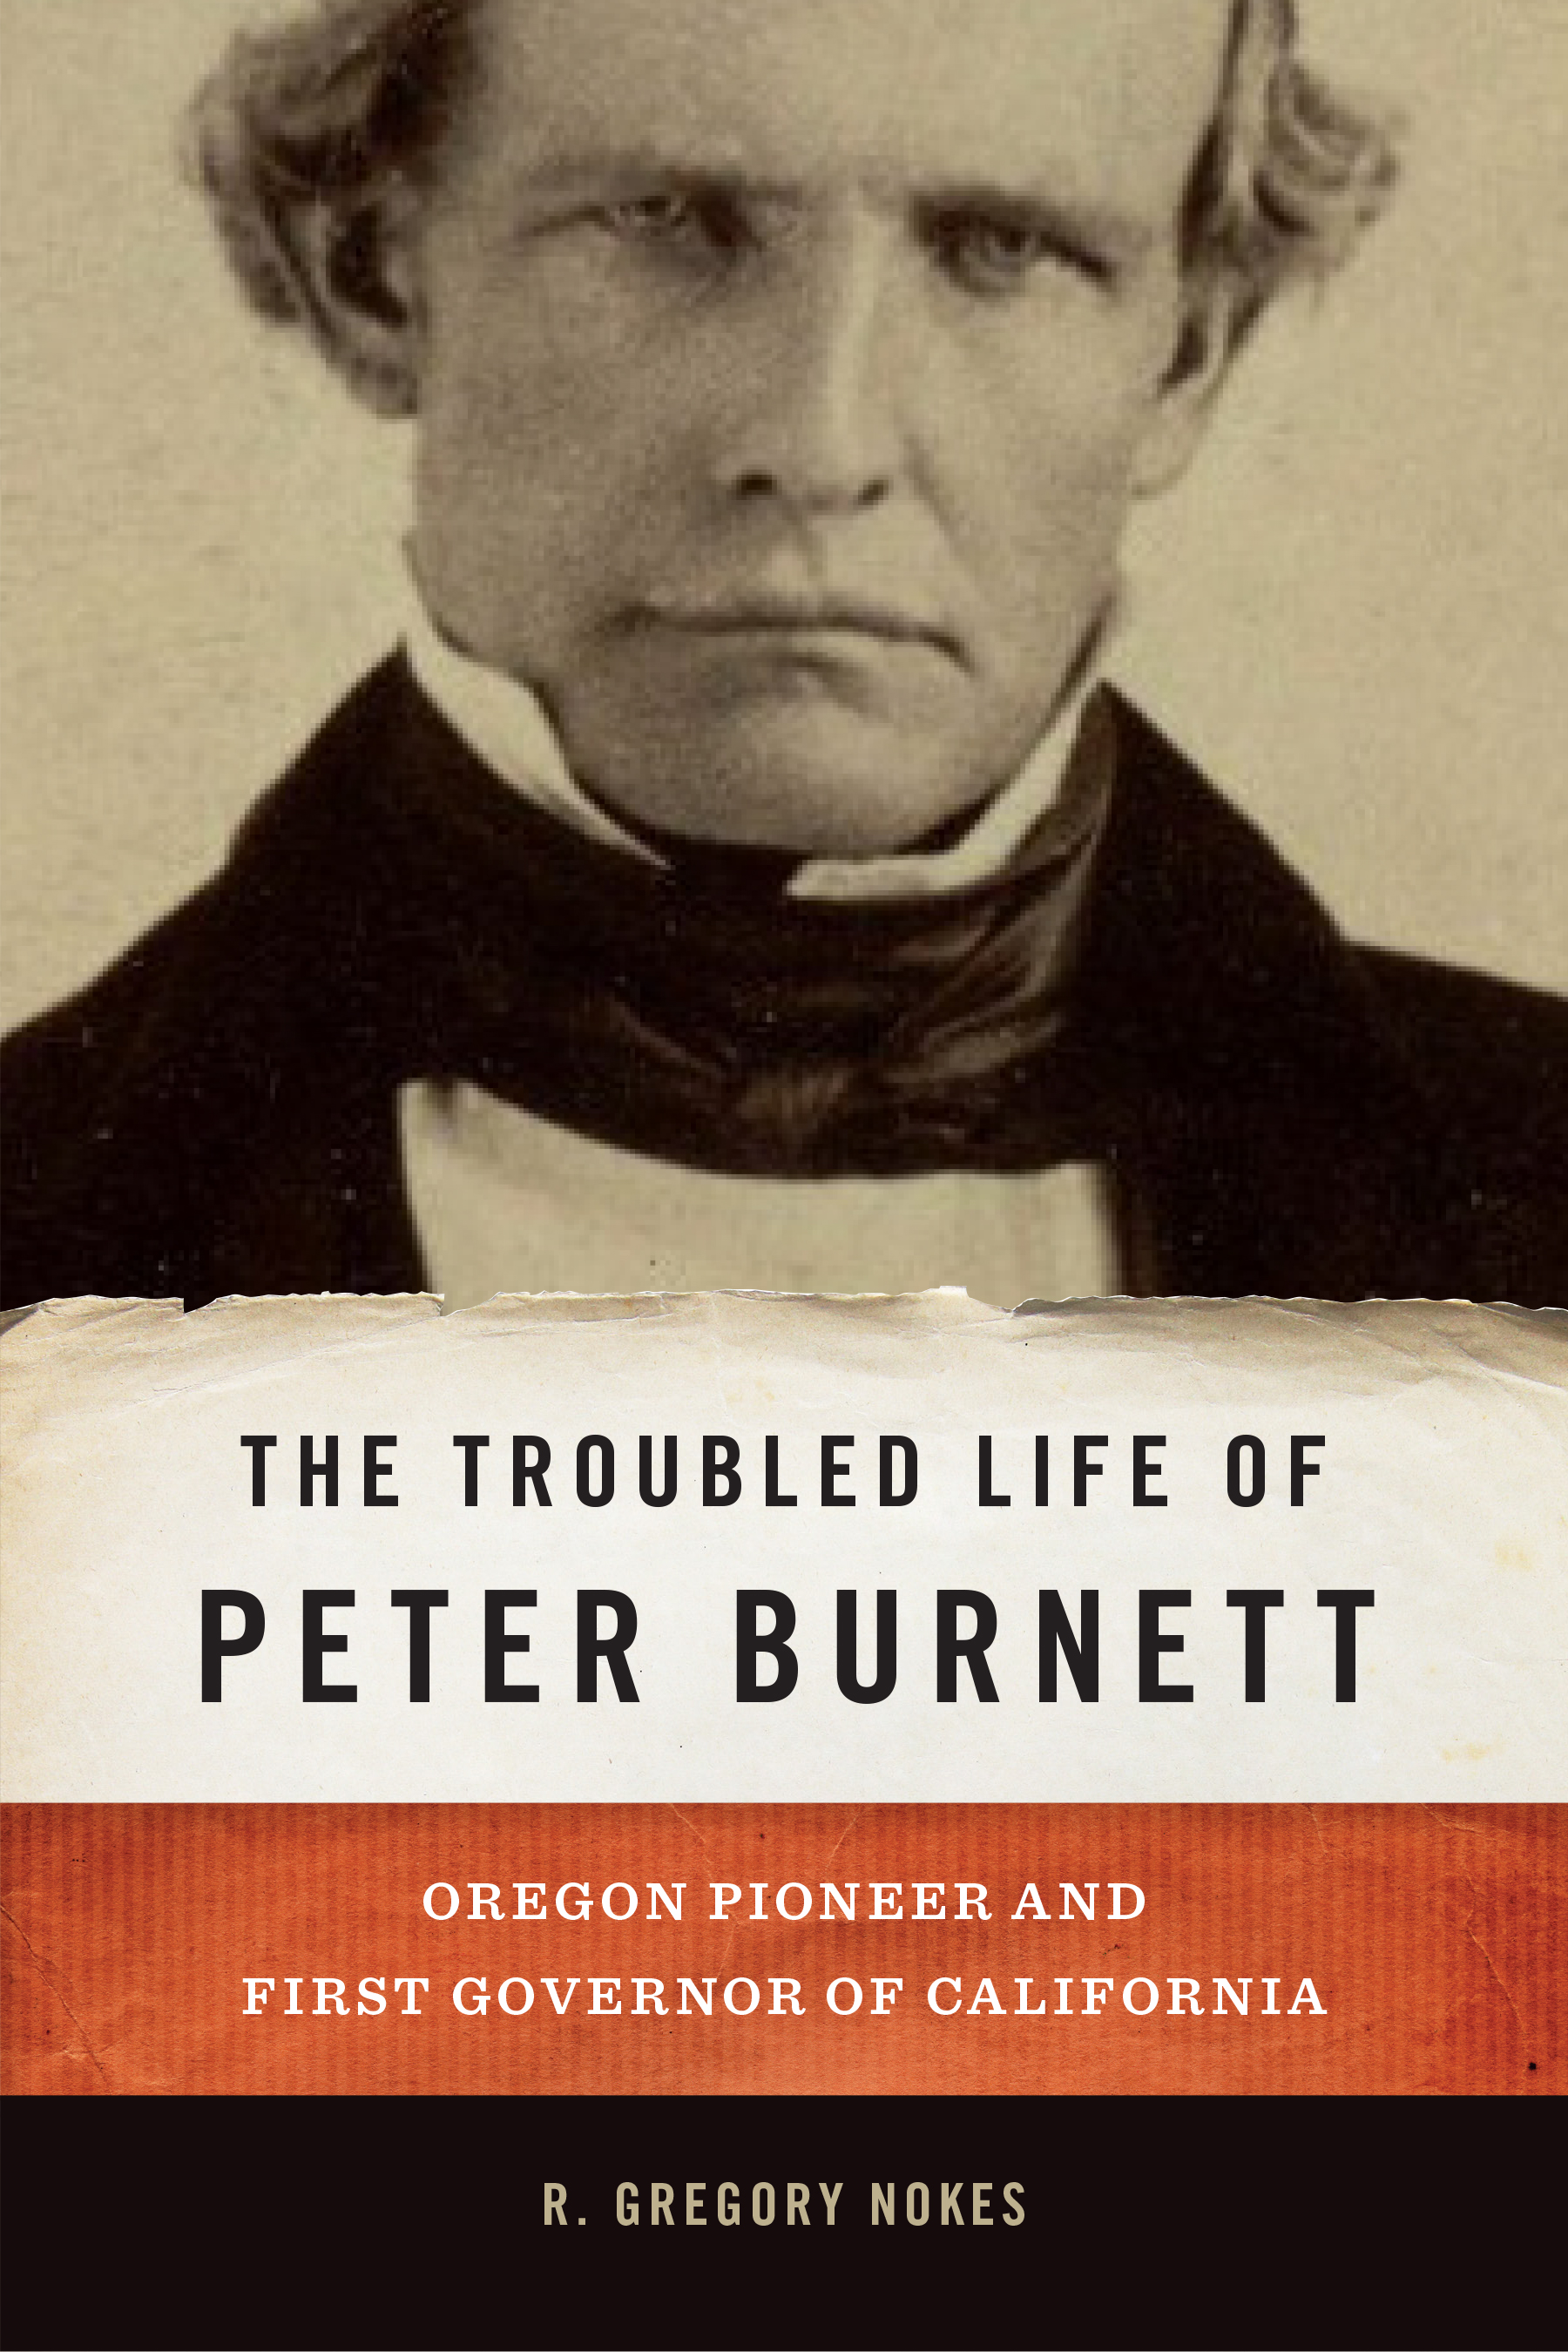 R. Gregory Nokes' "The Troubled Life of Peter Burnett"